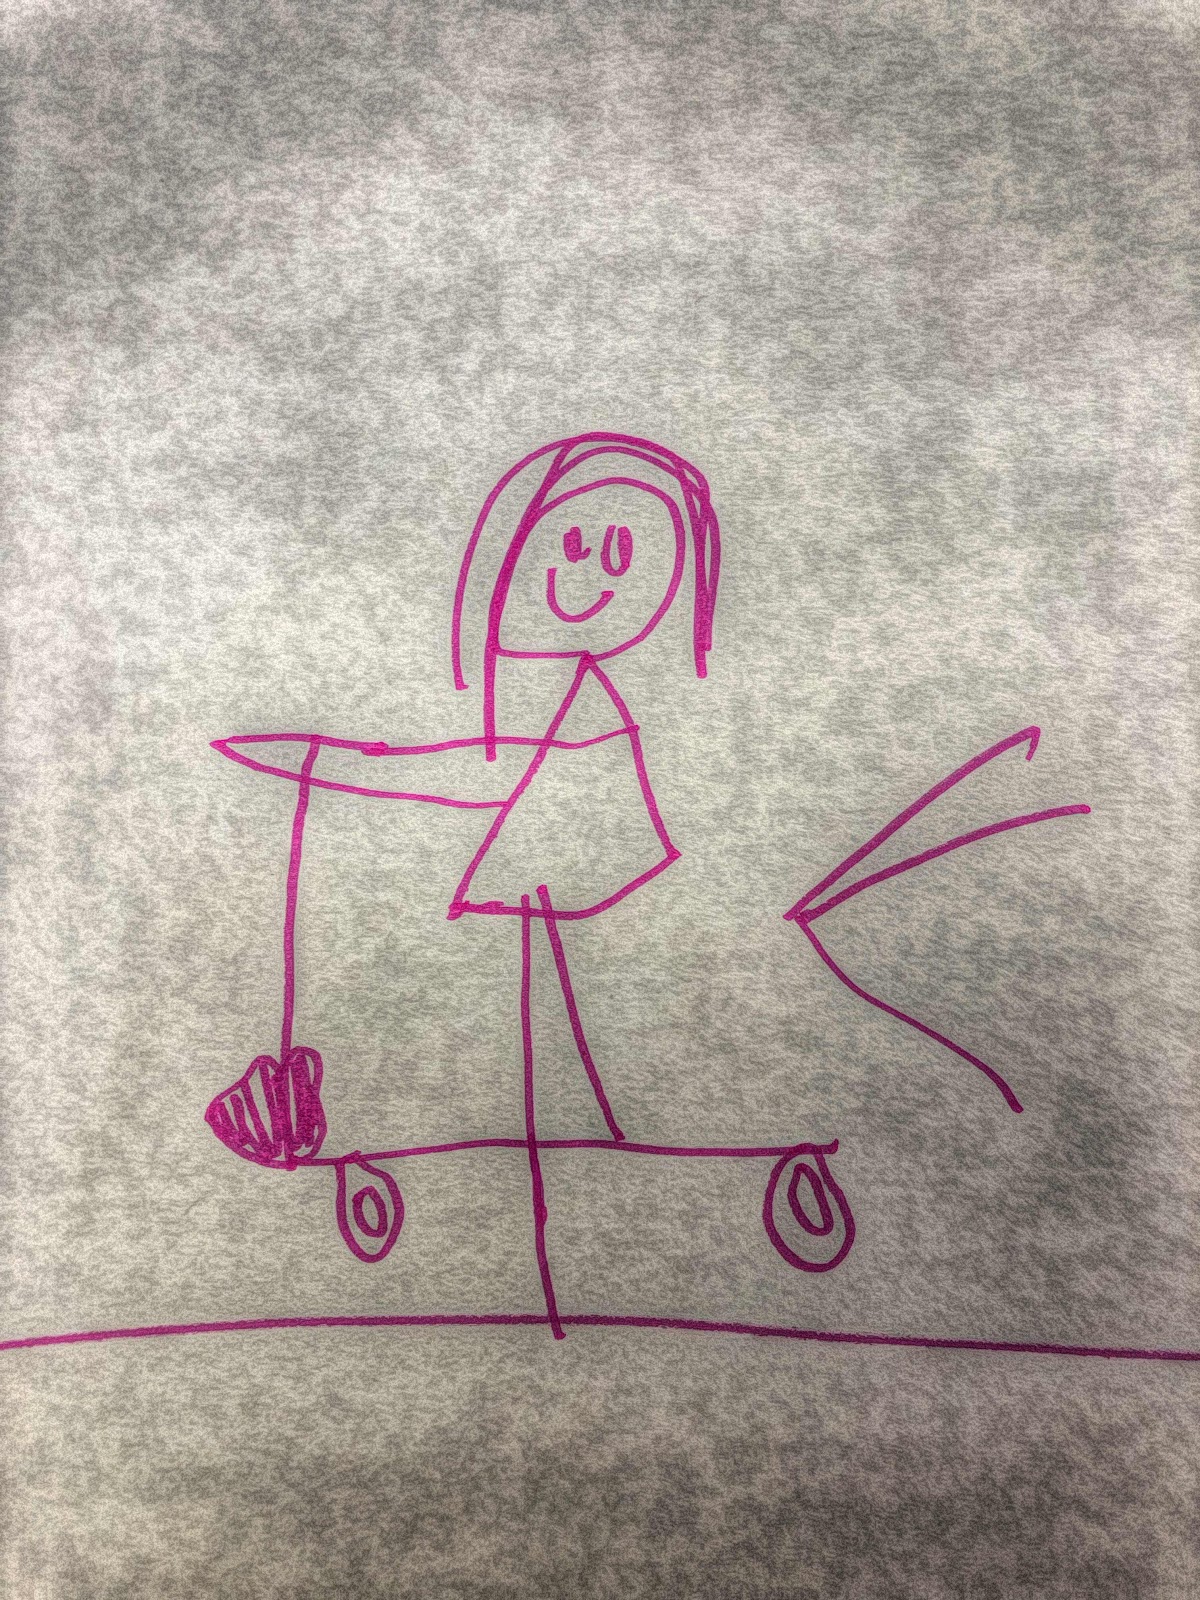 Scooter drawing free